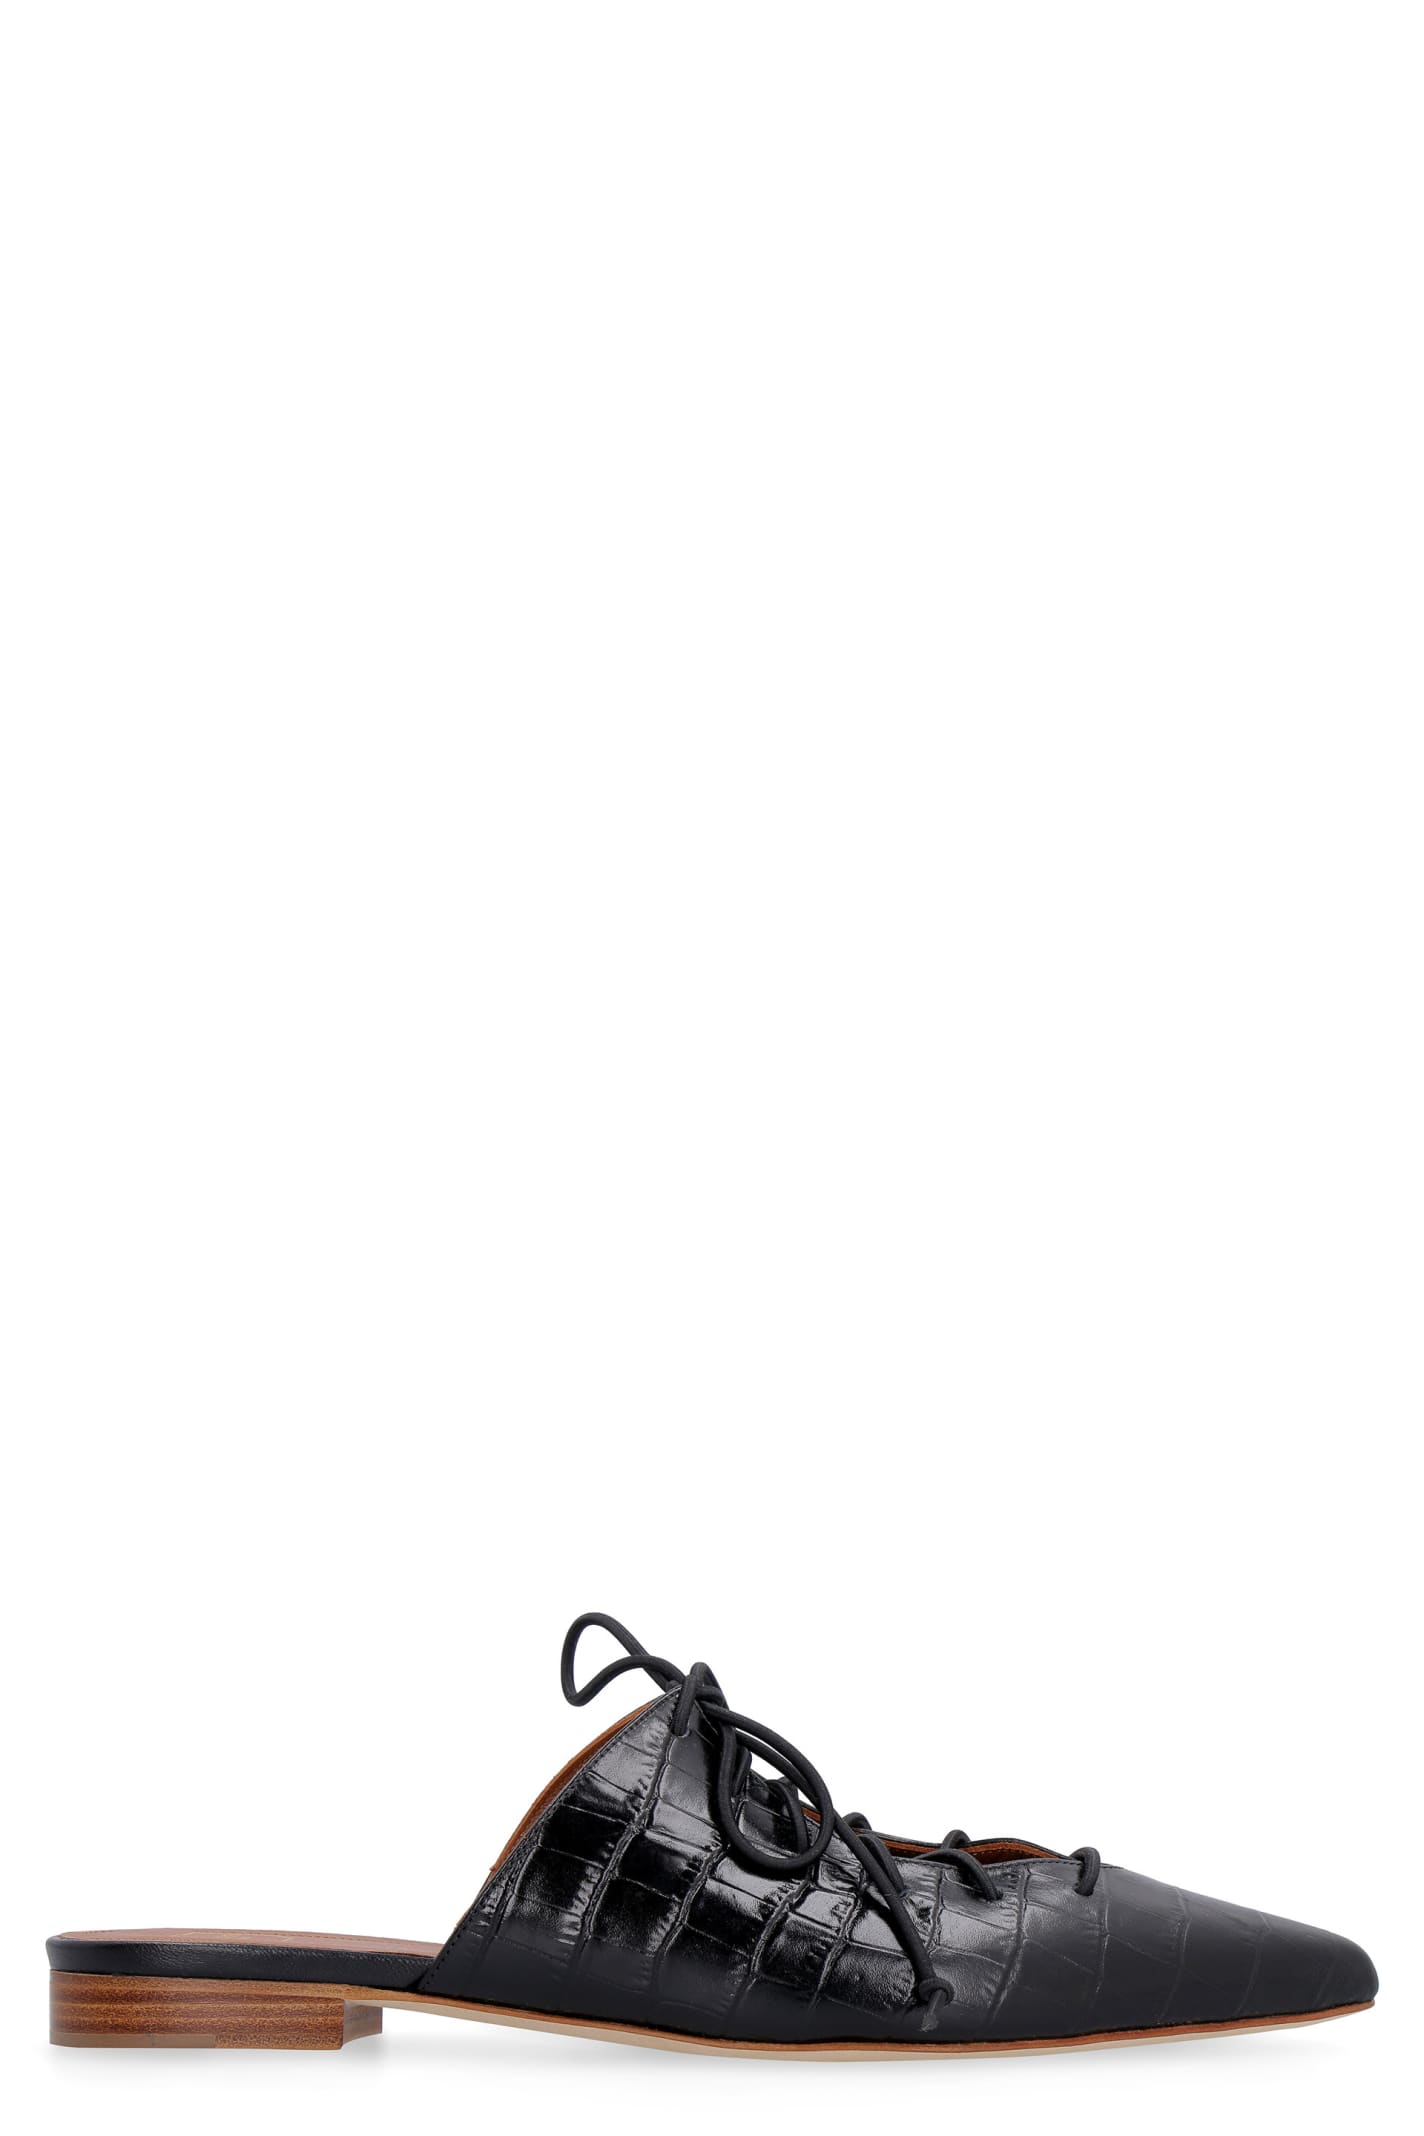 Malone Souliers Annie Leather Slippers In Black